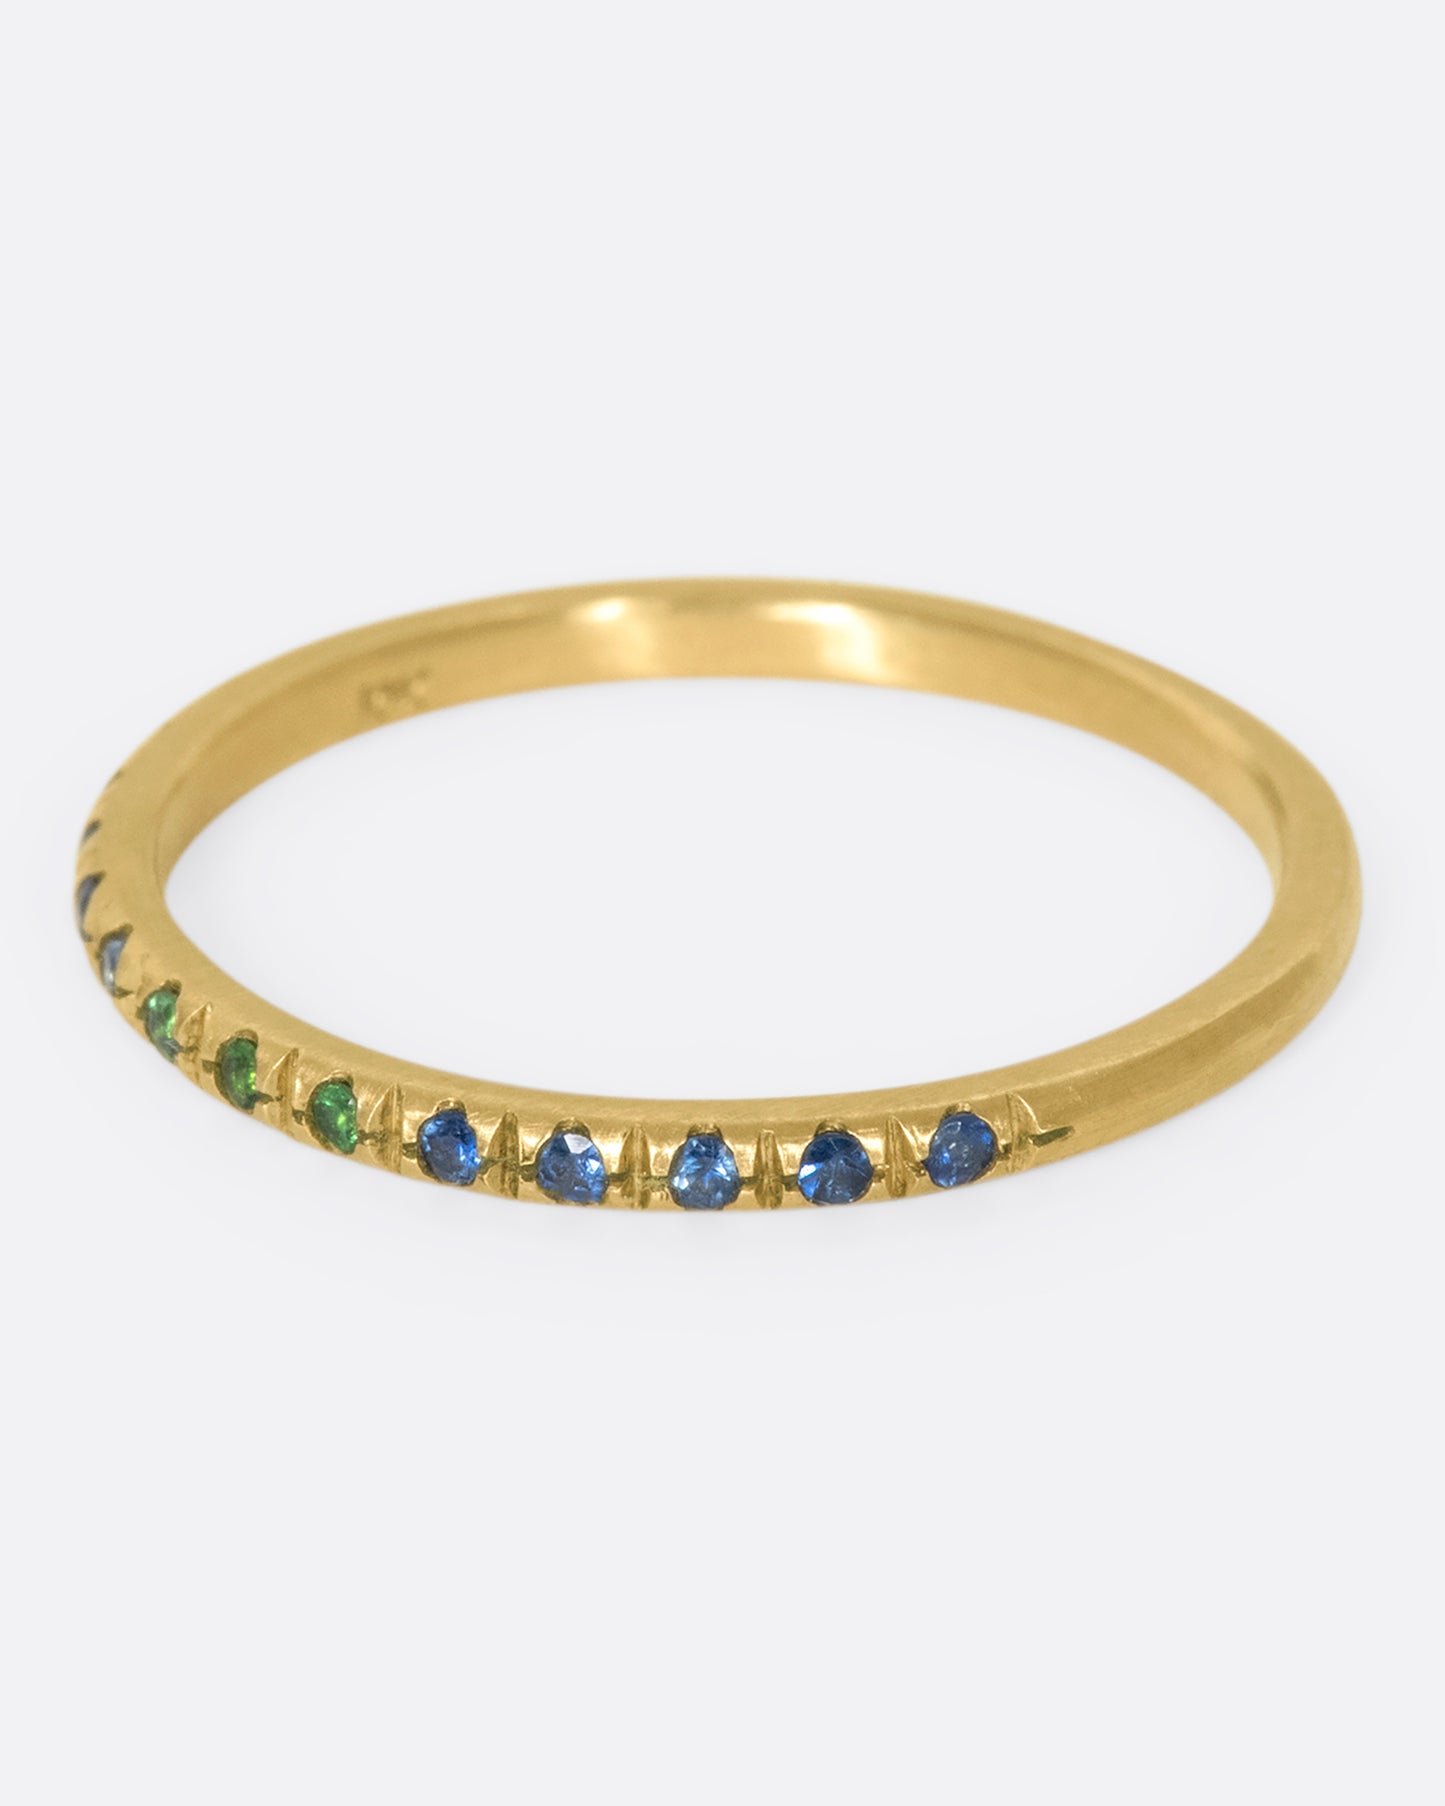 a thin yellow gold band with three green garnets in the middle and blue sapphires on either side